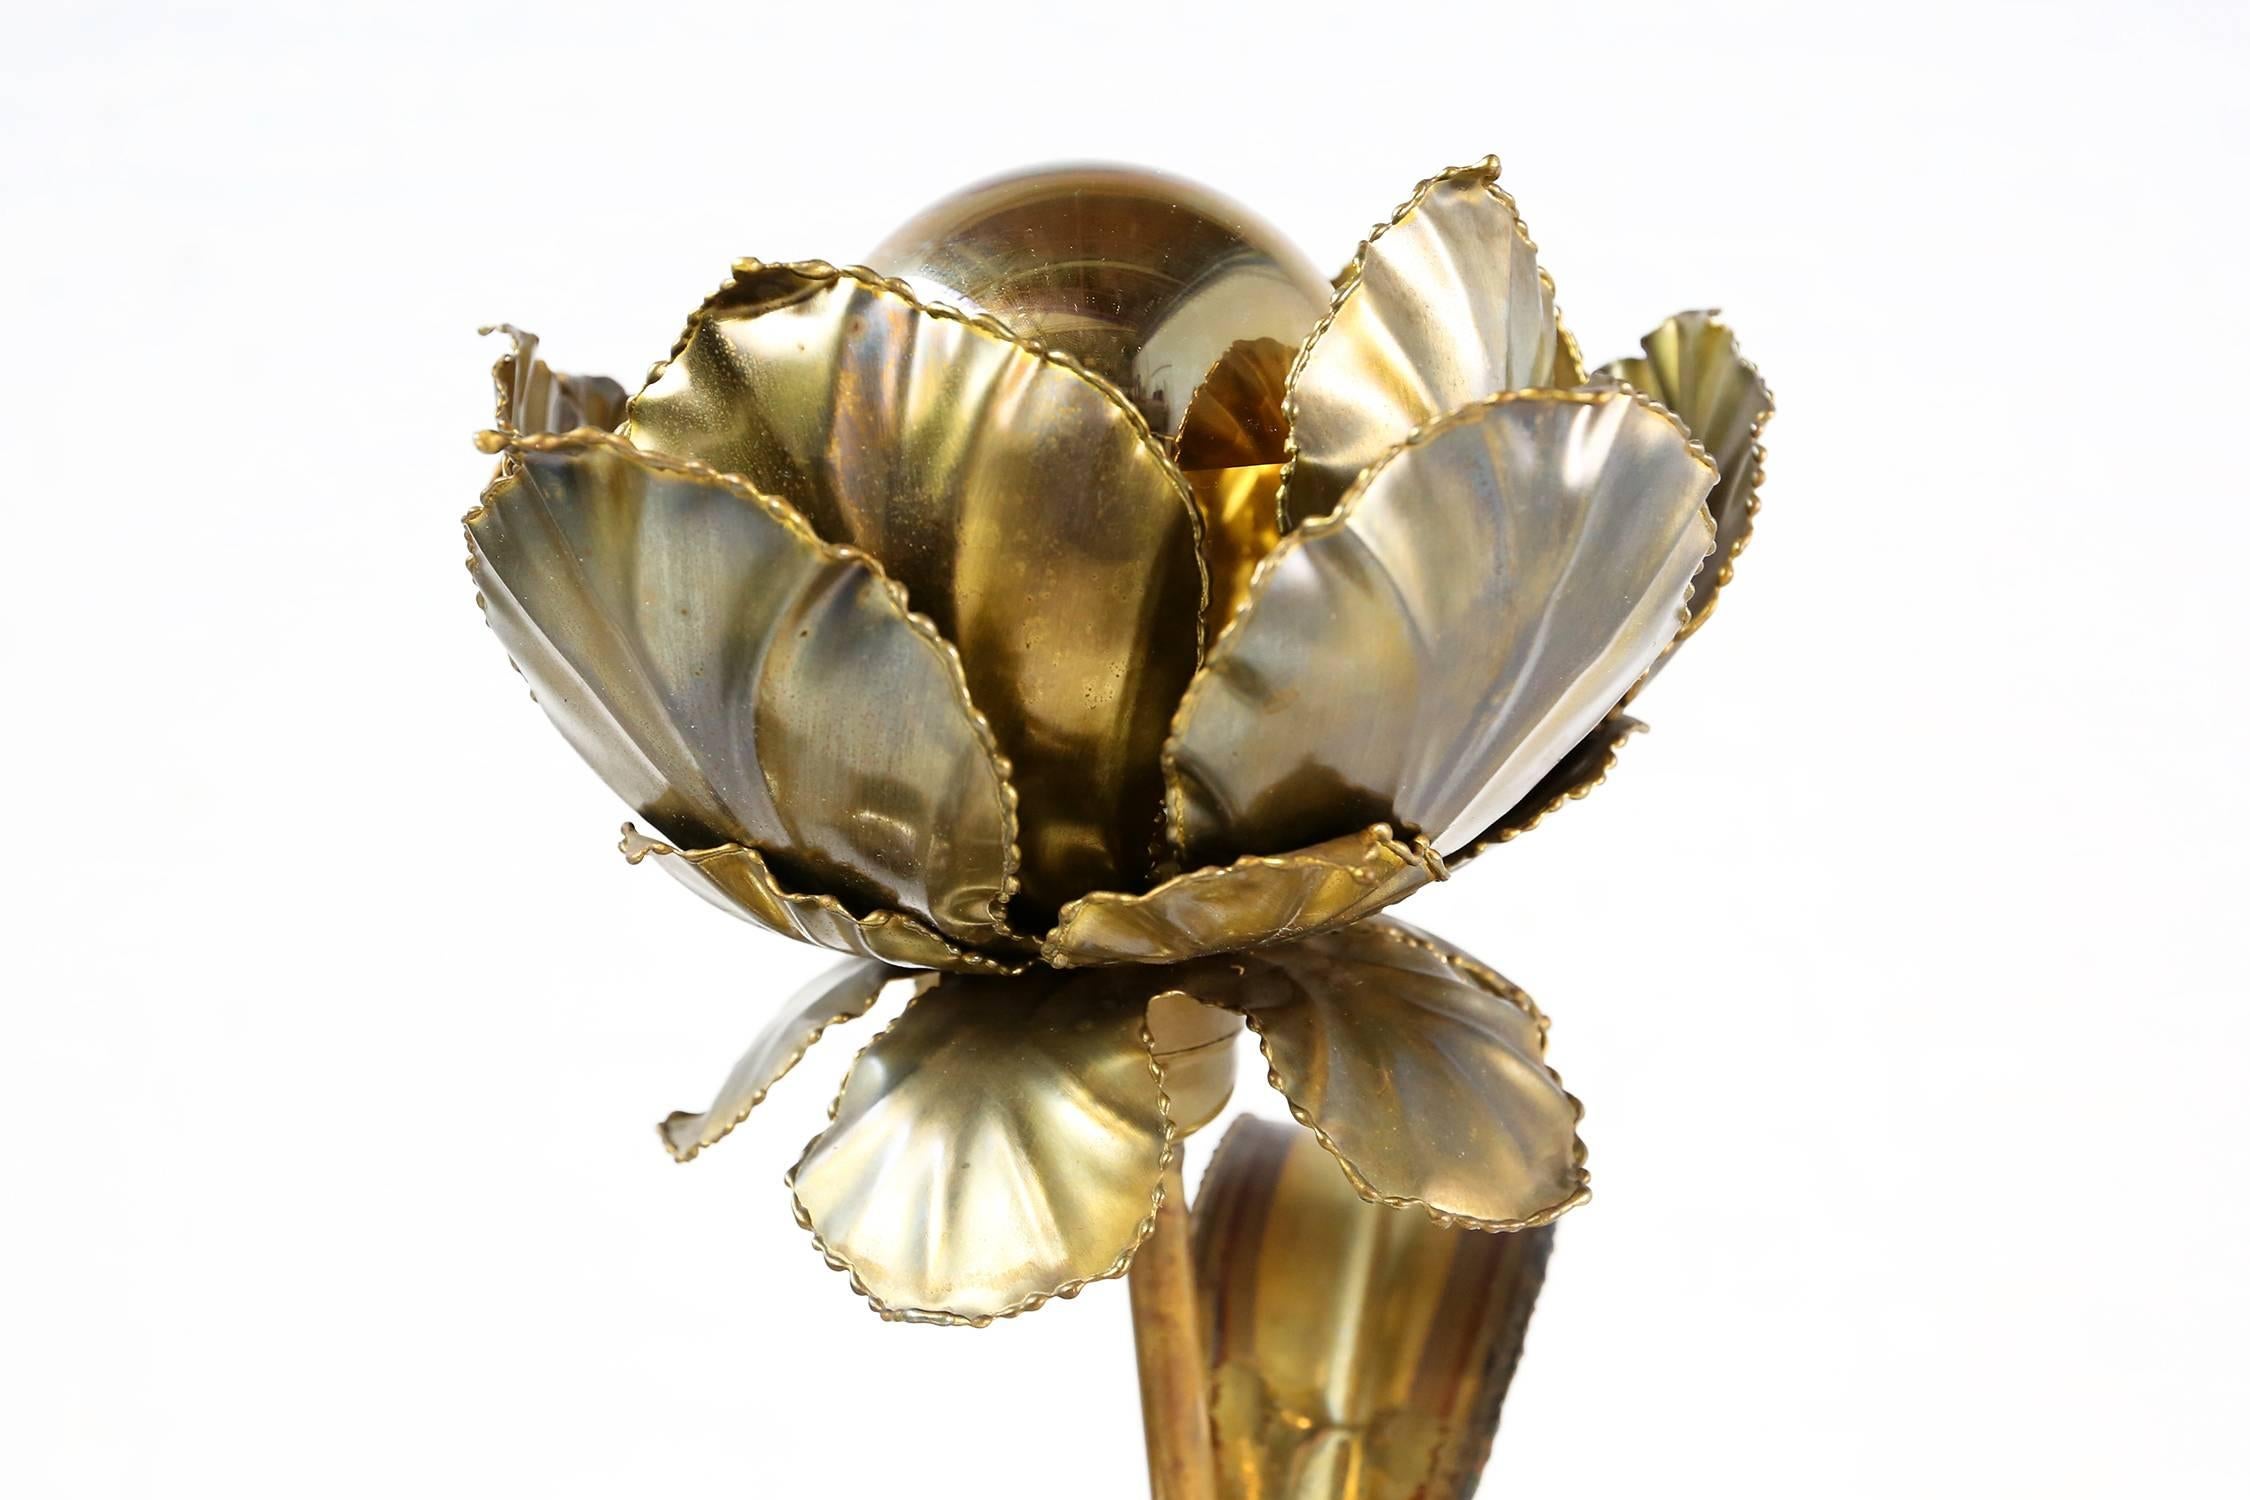 Sculptural floor lamp designed by Maison Jansen, manufactured in France, circa 1970.
This very decorative lamp is made of high quality brass in the shape of beautiful flowers, making this lamp a true art piece! When lit, it creates an amazing